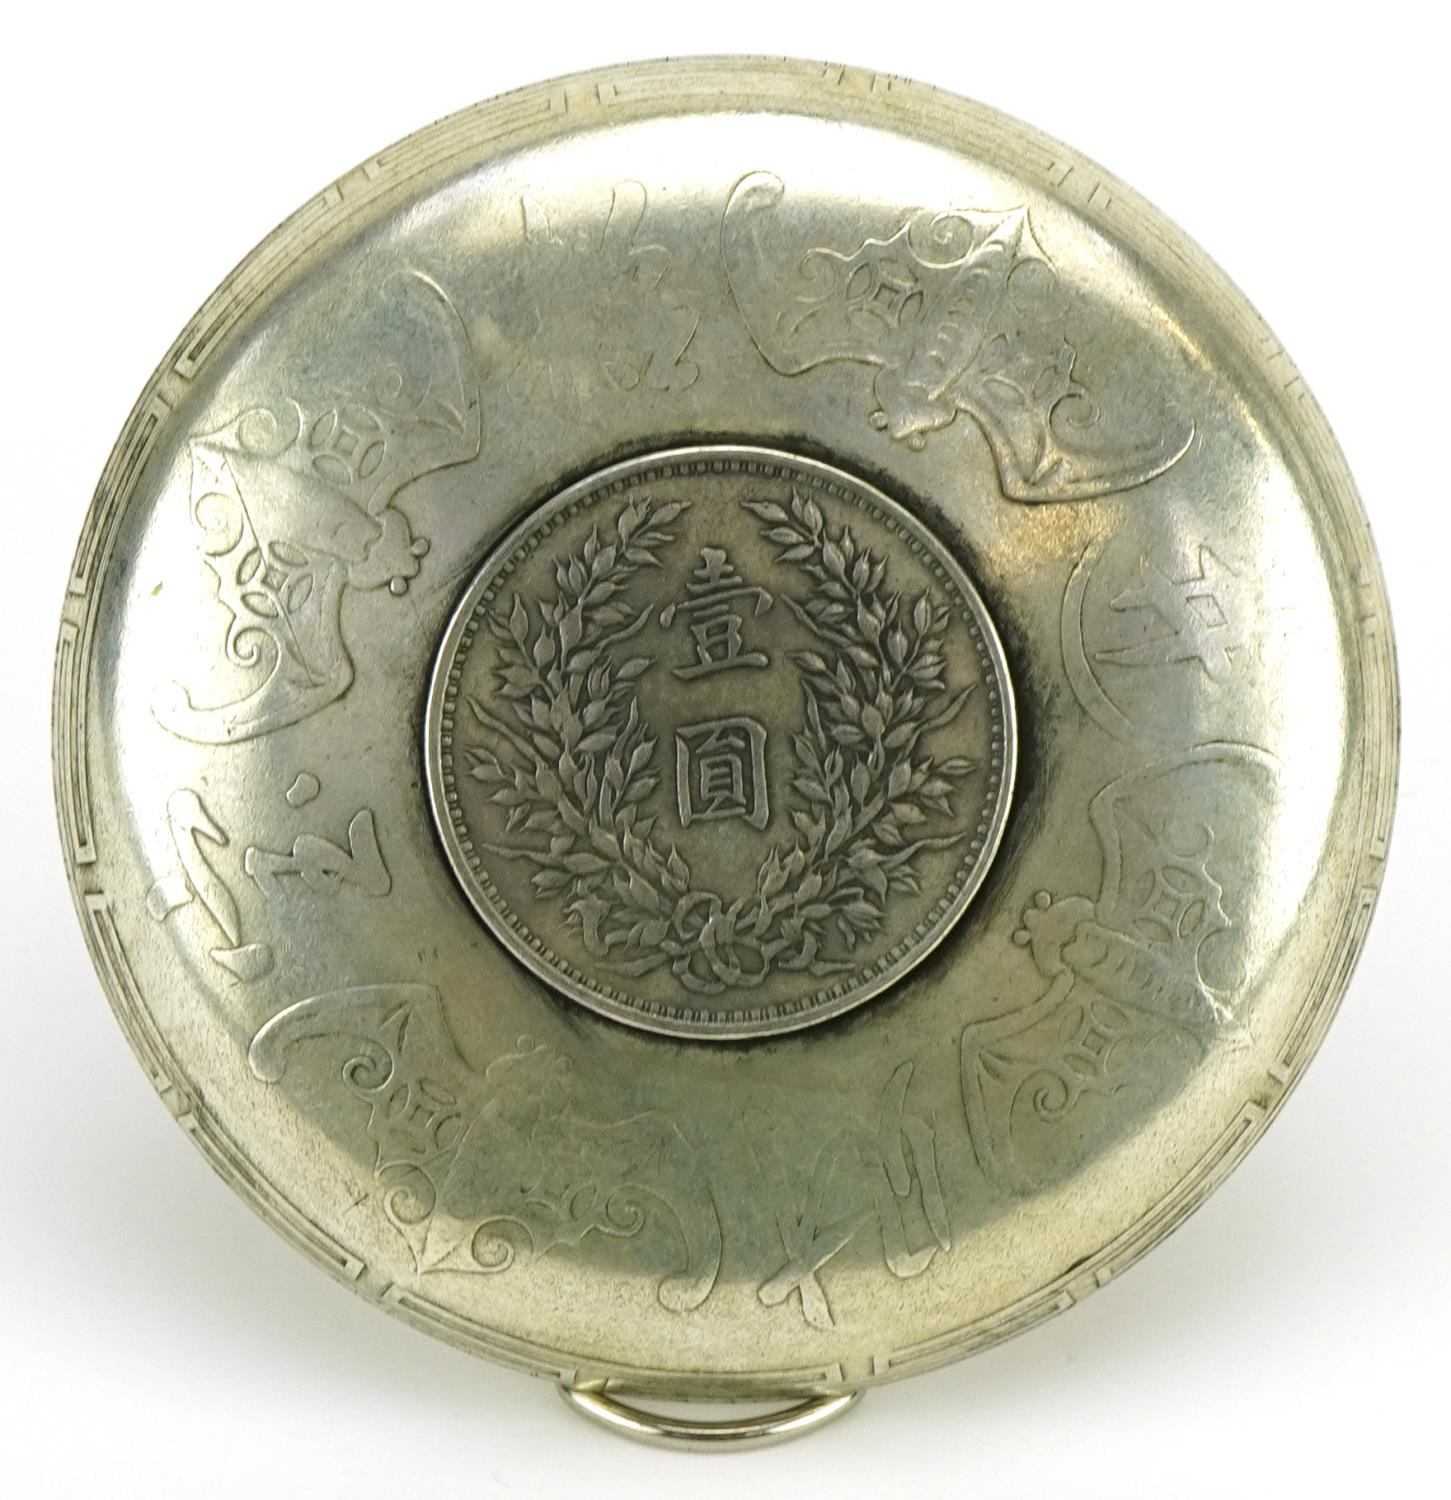 Chinese white metal dragon dish inset with a coin, 9.5cm in diameter : For further information on - Image 2 of 2